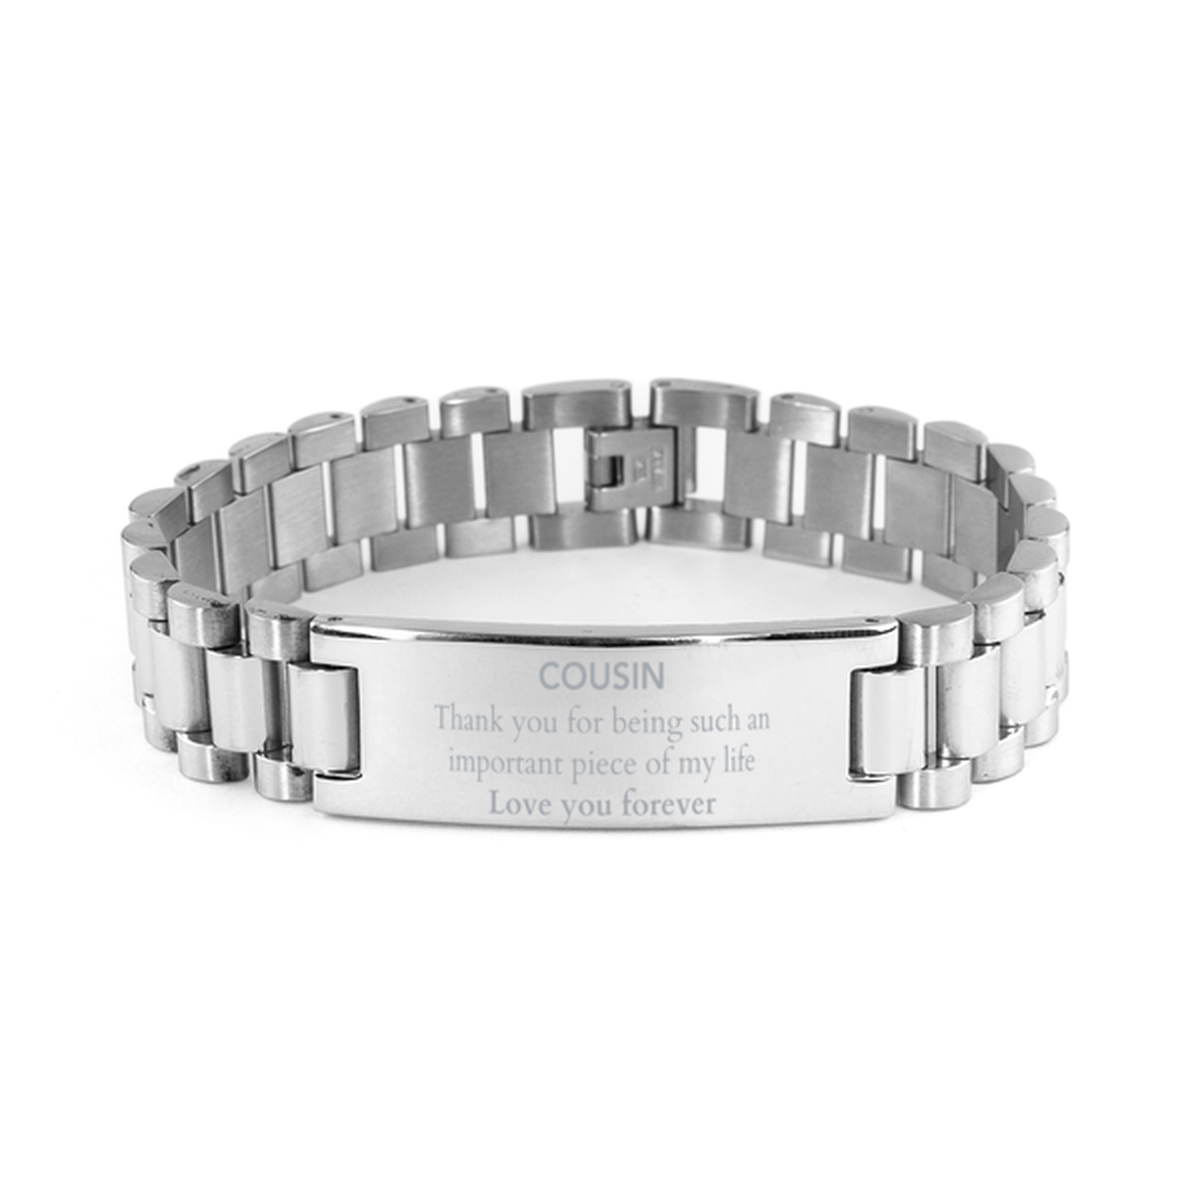 Appropriate Cousin Ladder Stainless Steel Bracelet Epic Birthday Gifts for Cousin Thank you for being such an important piece of my life Cousin Christmas Mothers Fathers Day